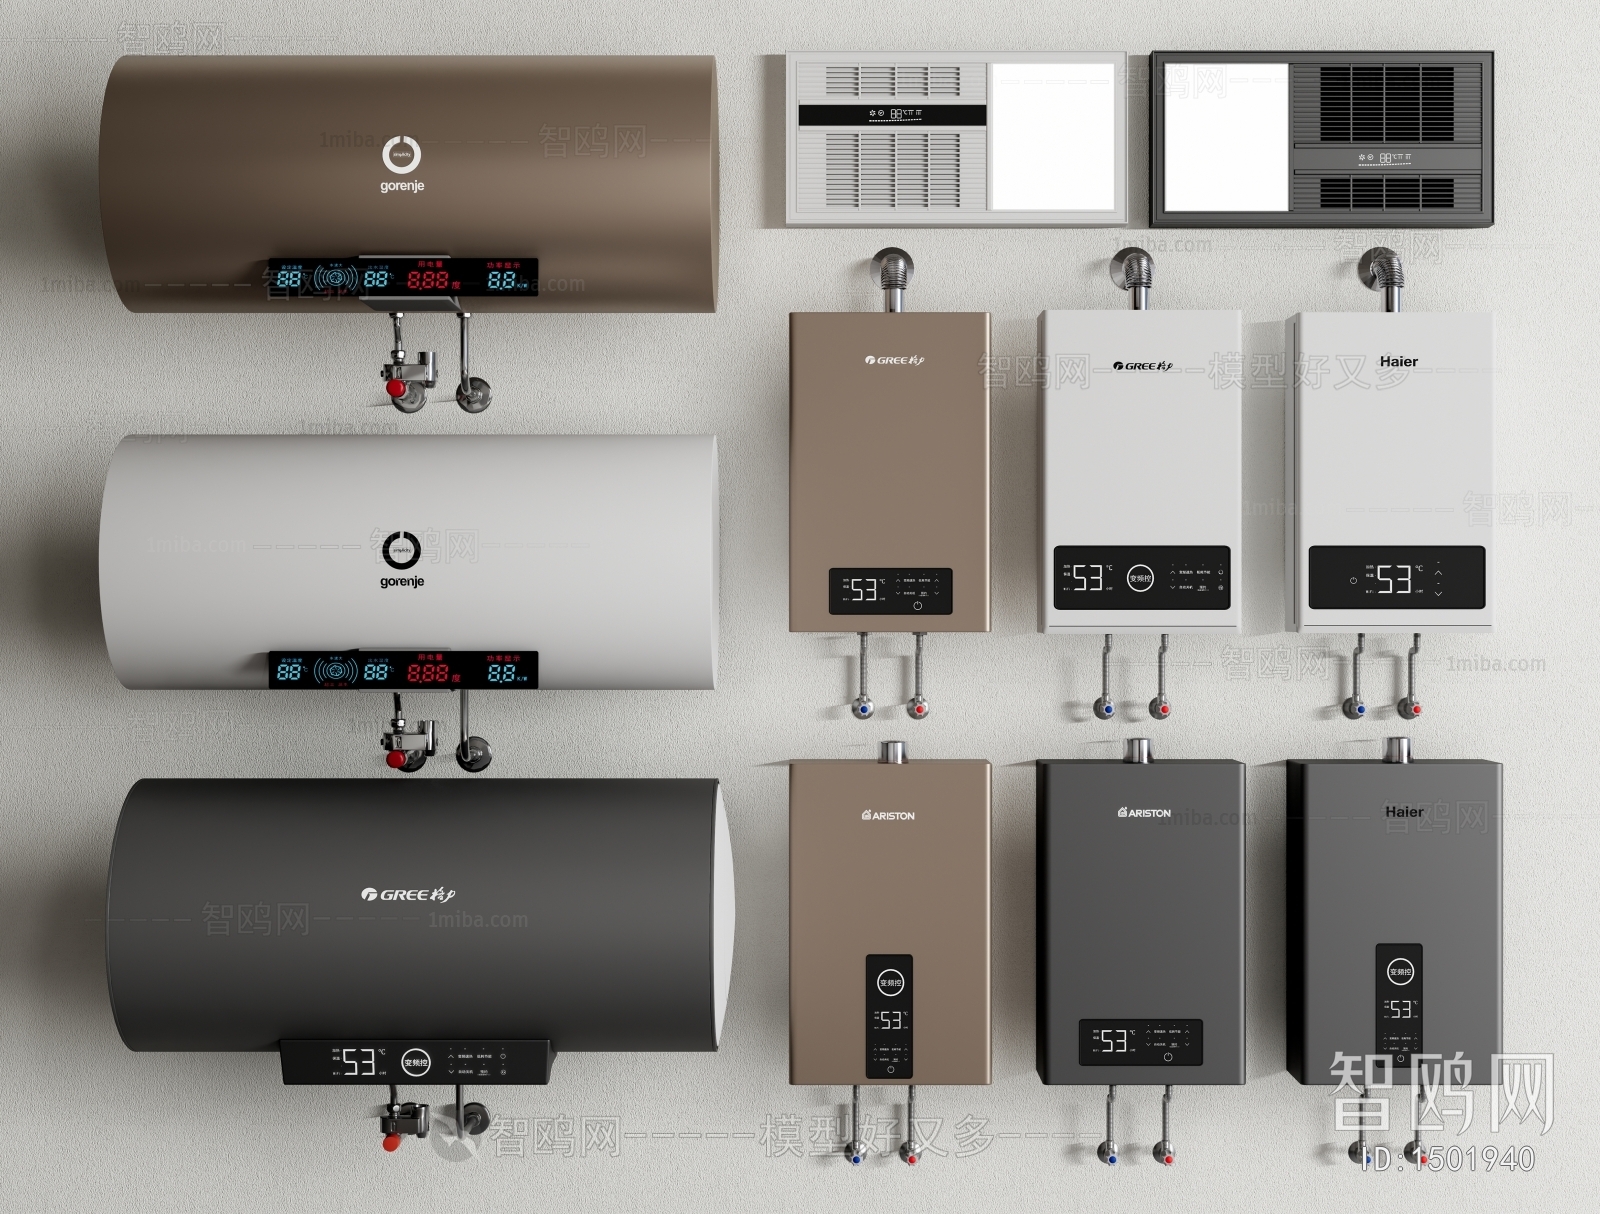 Modern Household Electrical Appliances